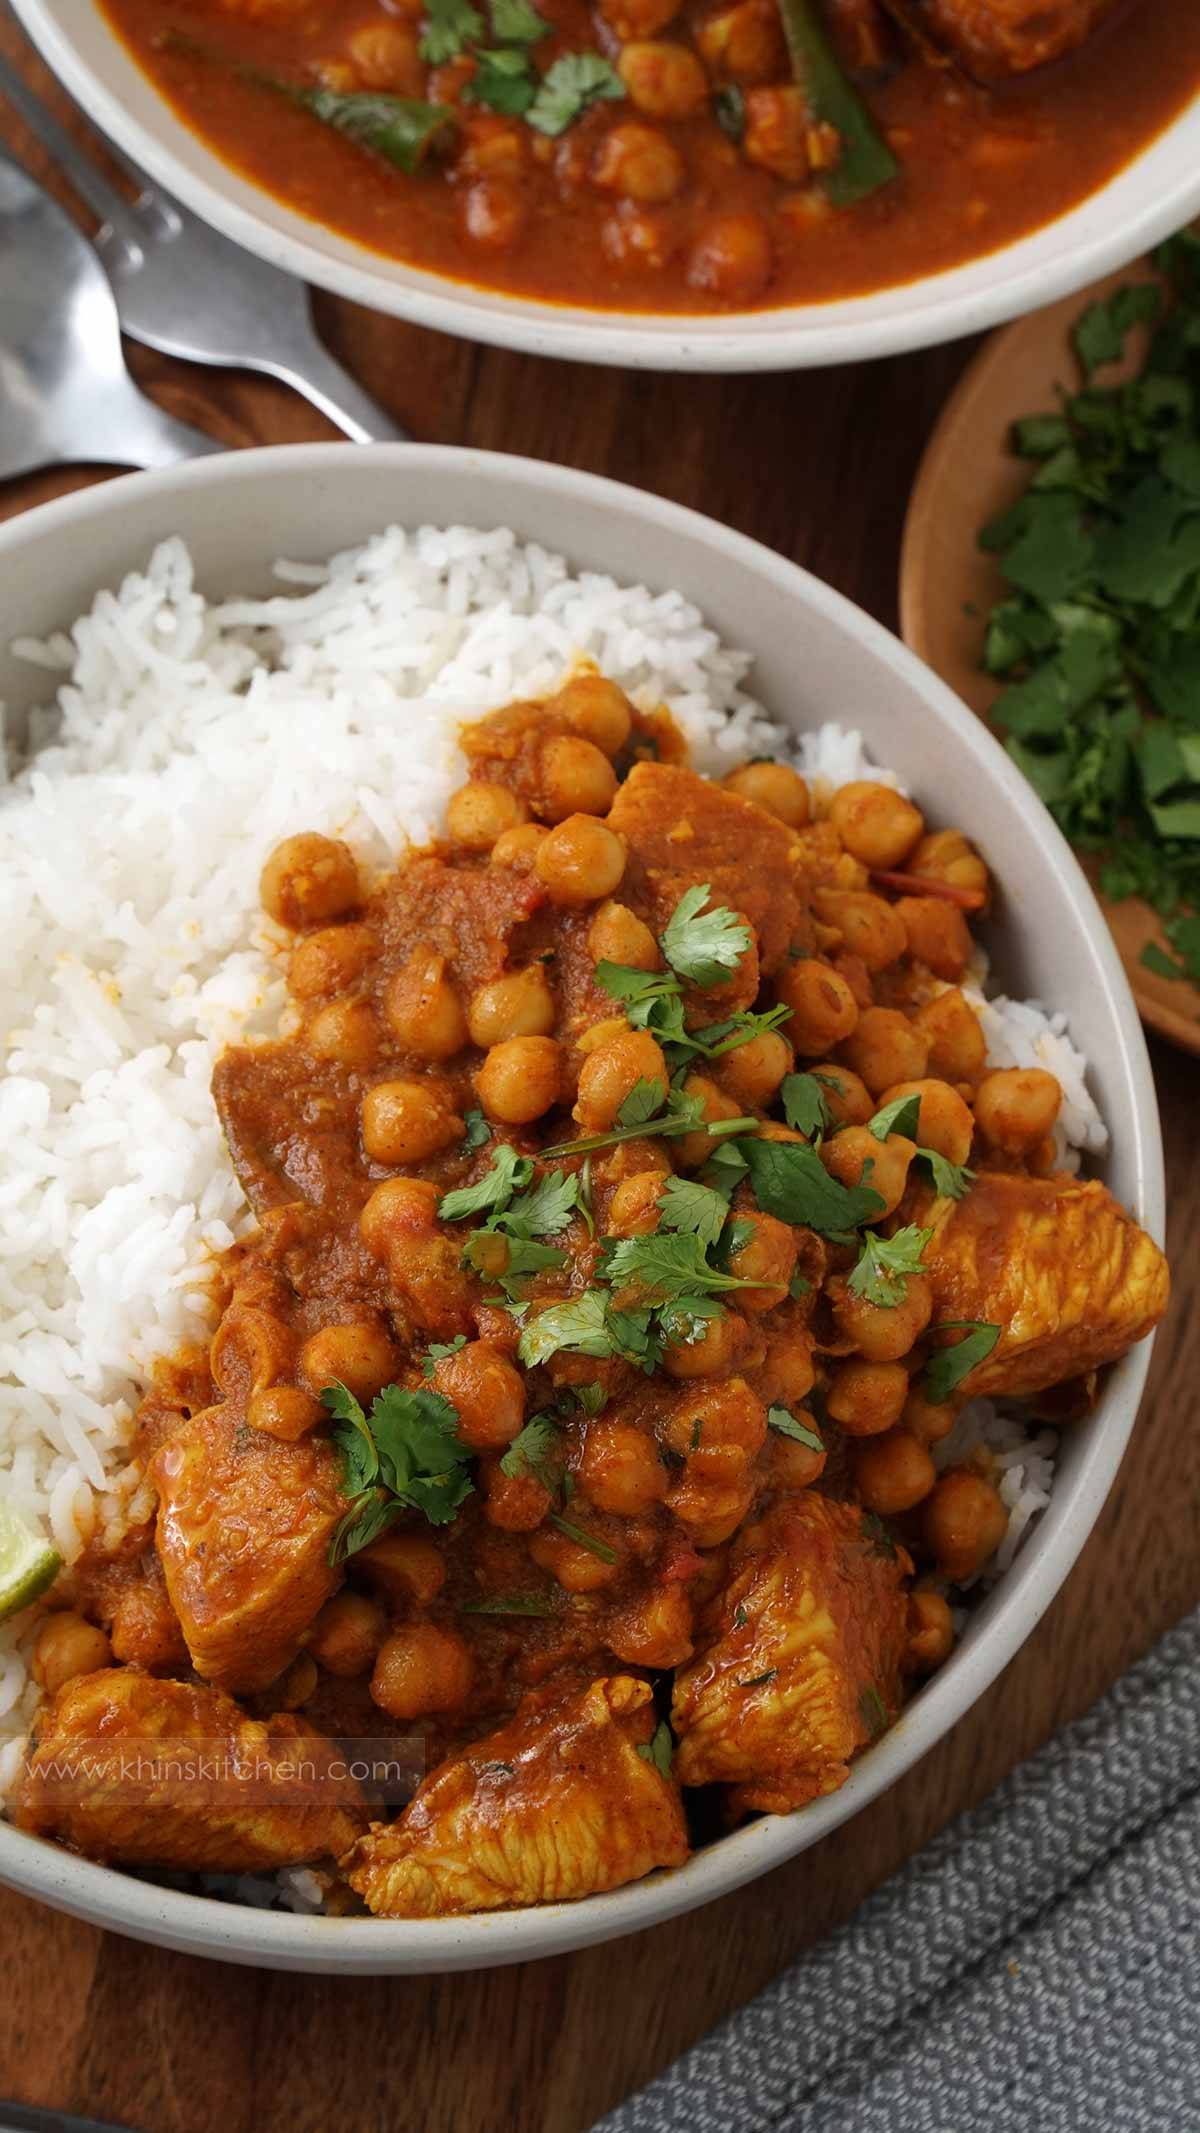 A grey bowl containing chicken curry with chick pea on top of the white rice.